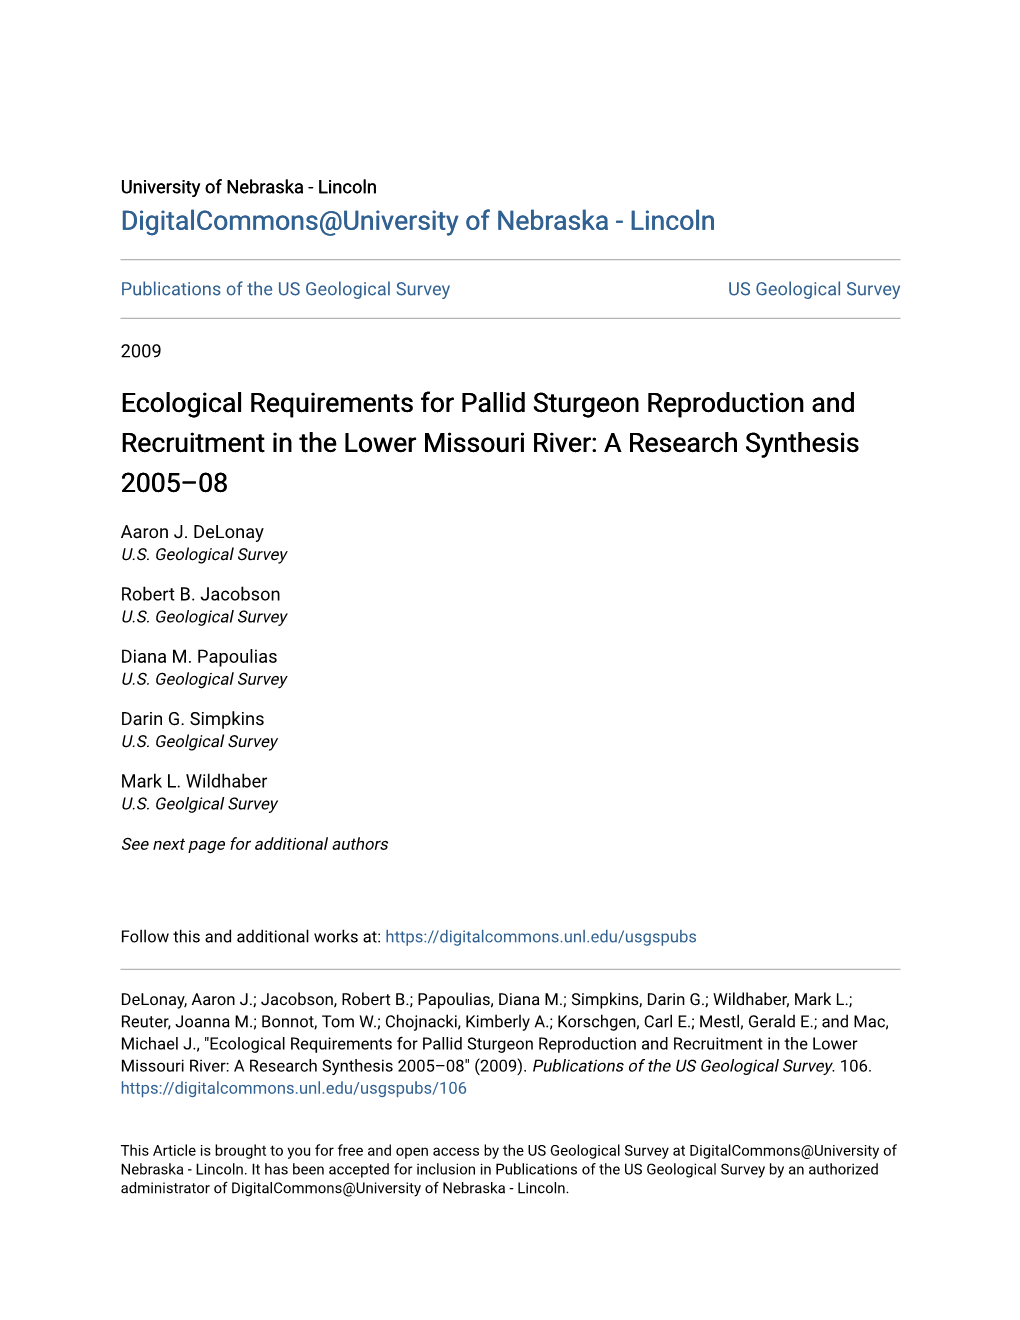 Ecological Requirements for Pallid Sturgeon Reproduction and Recruitment in the Lower Missouri River: a Research Synthesis 2005–08